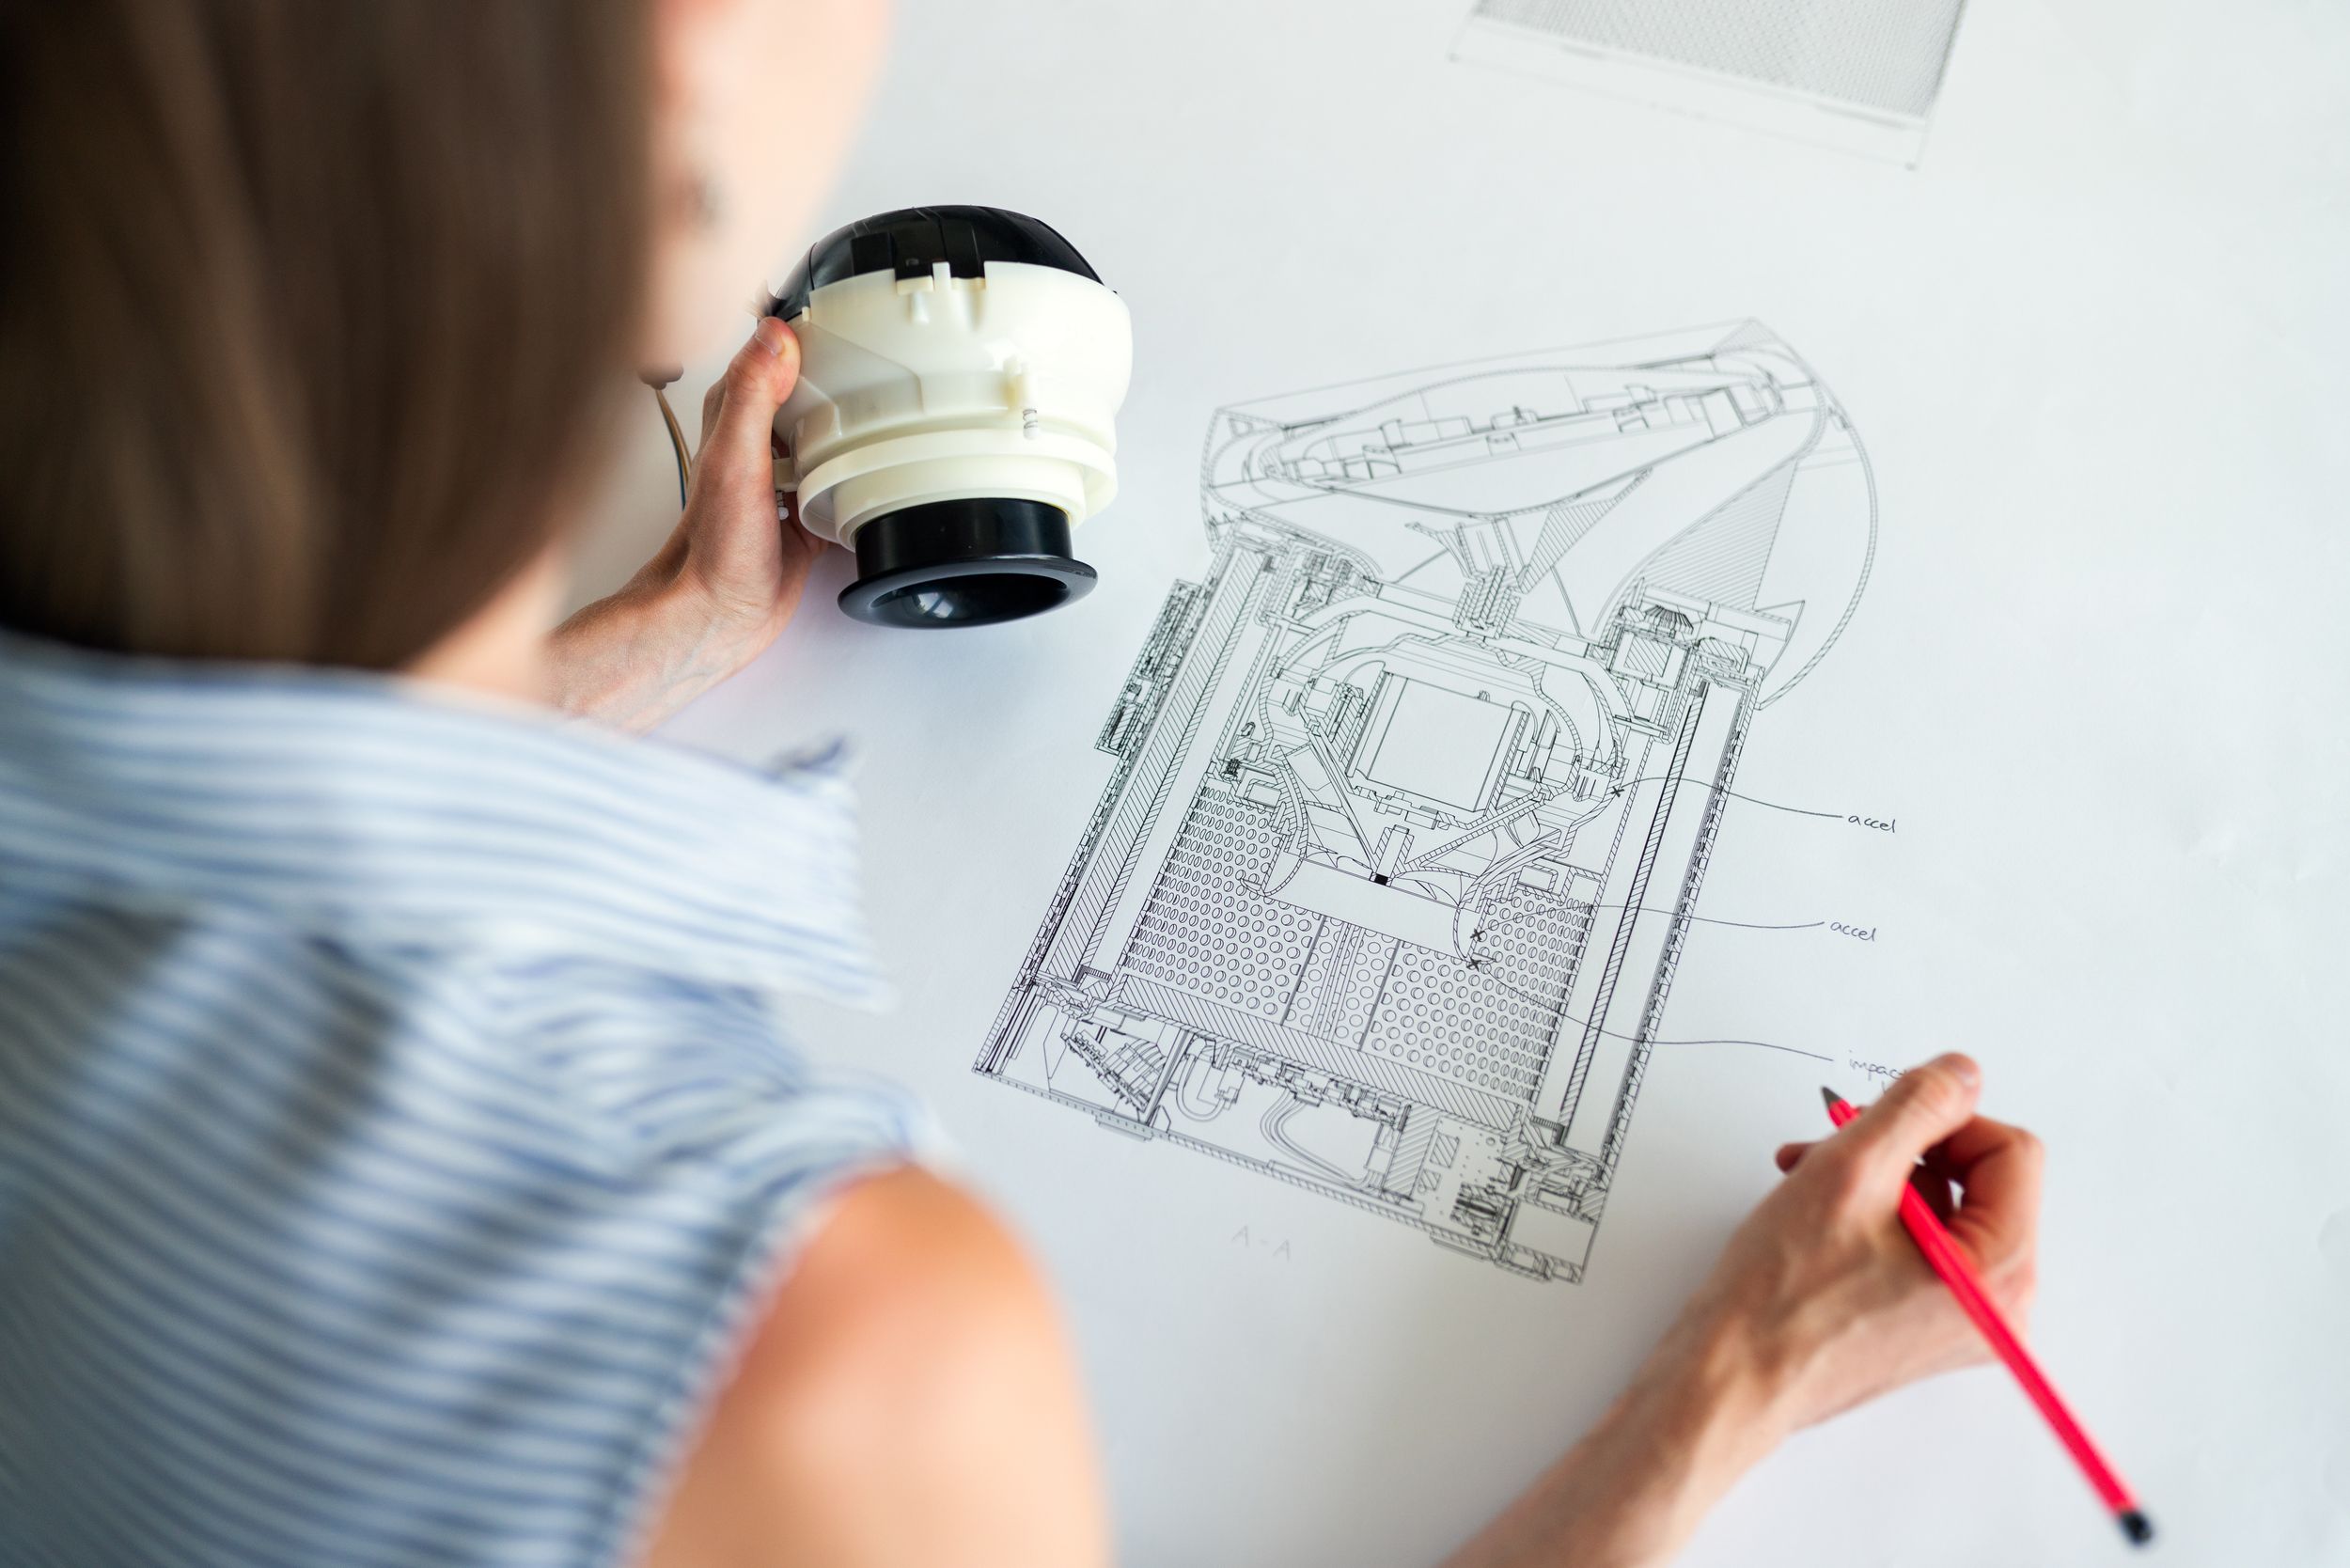 Woman engineer sketching a draft of an appliance.